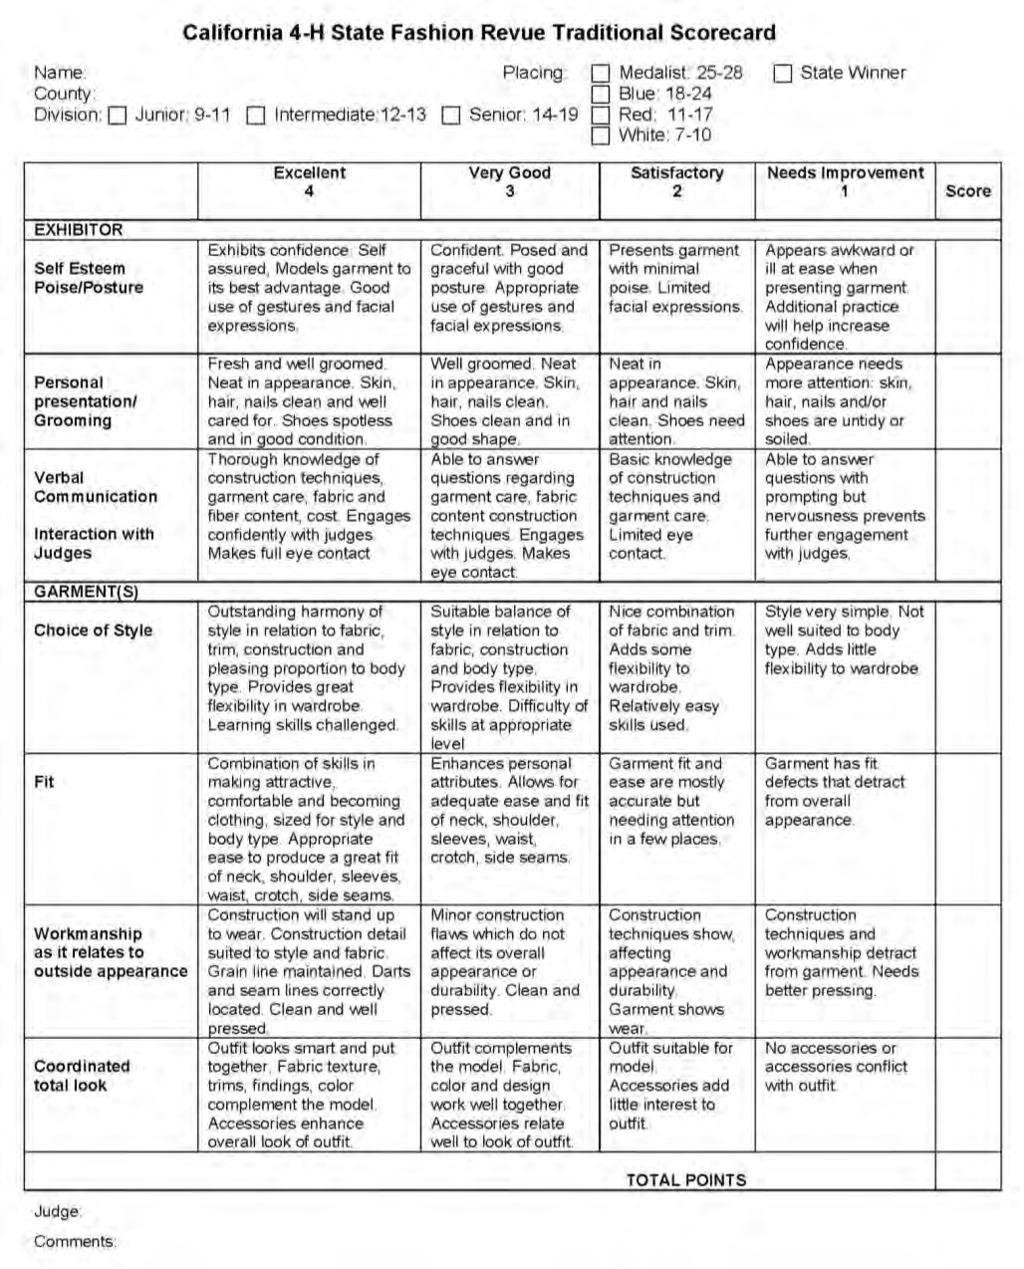 Rubric Scorecard Explanation Be familiar with the Rubric Scorecard format prior to the event. Make sure you are using the correct rubric scorecard for the category you are evaluating.